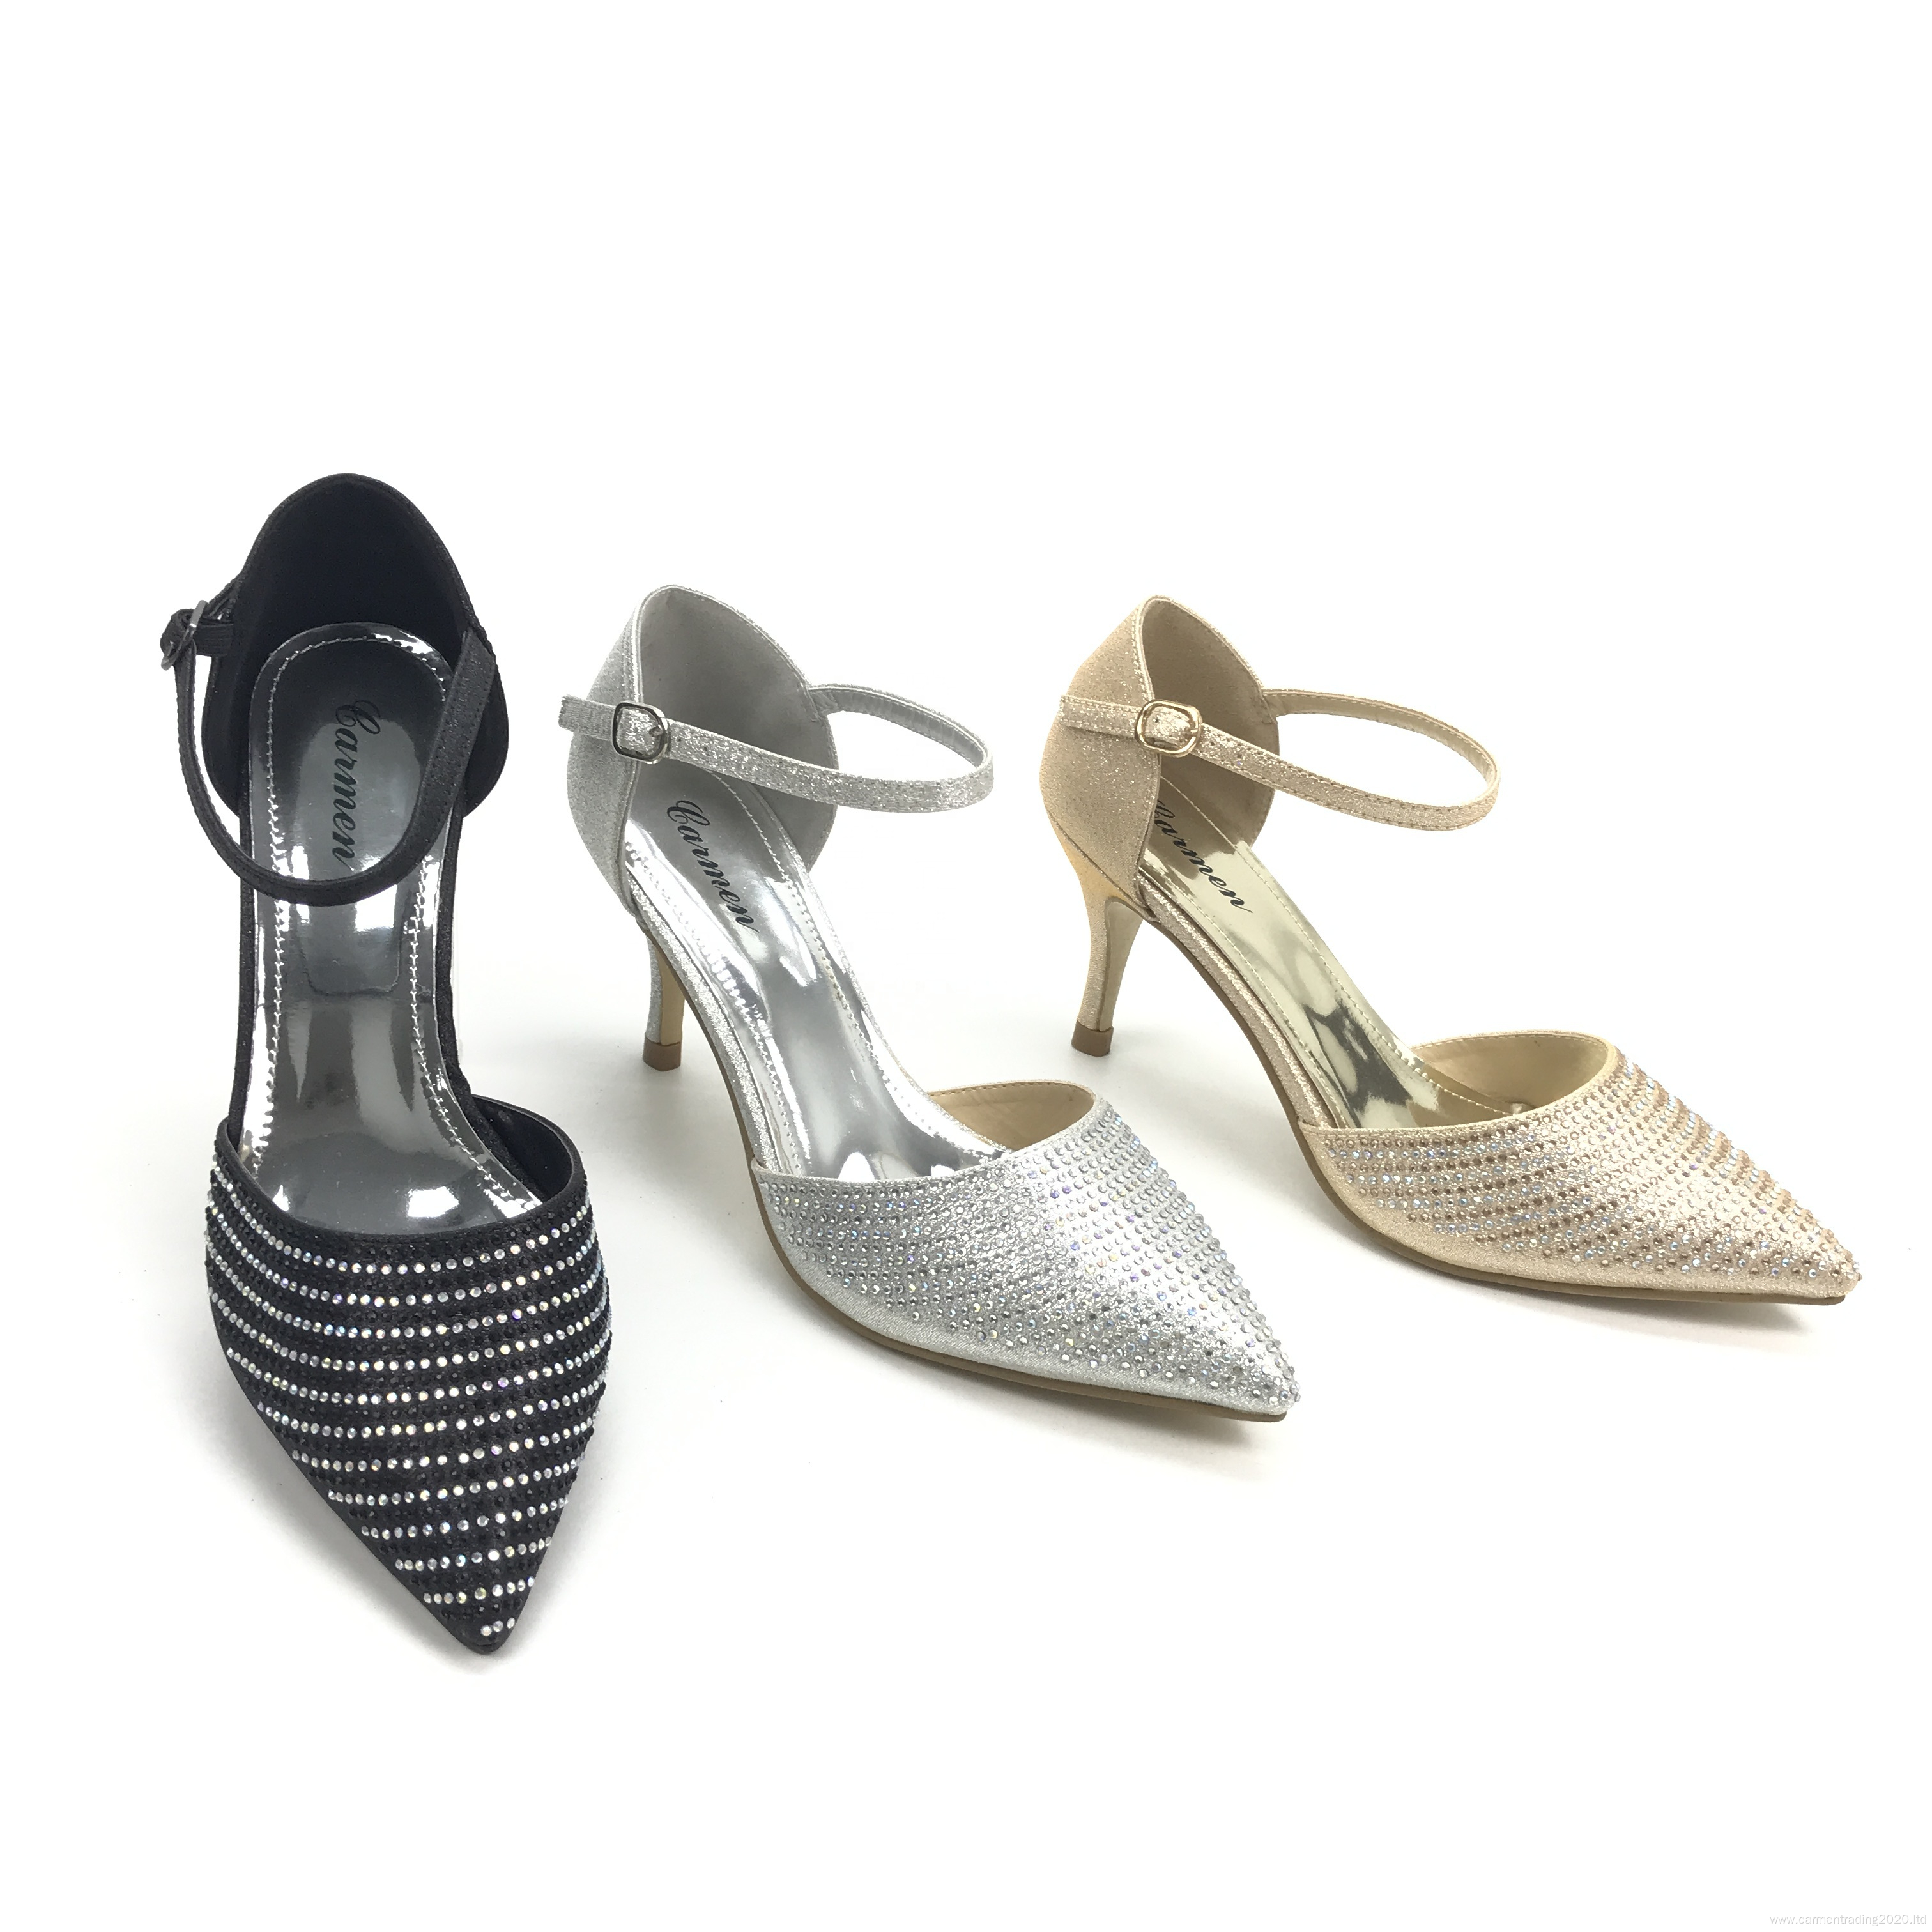 Women Ankle Strip Elegant D'Orsay Closed Pointed Pumps